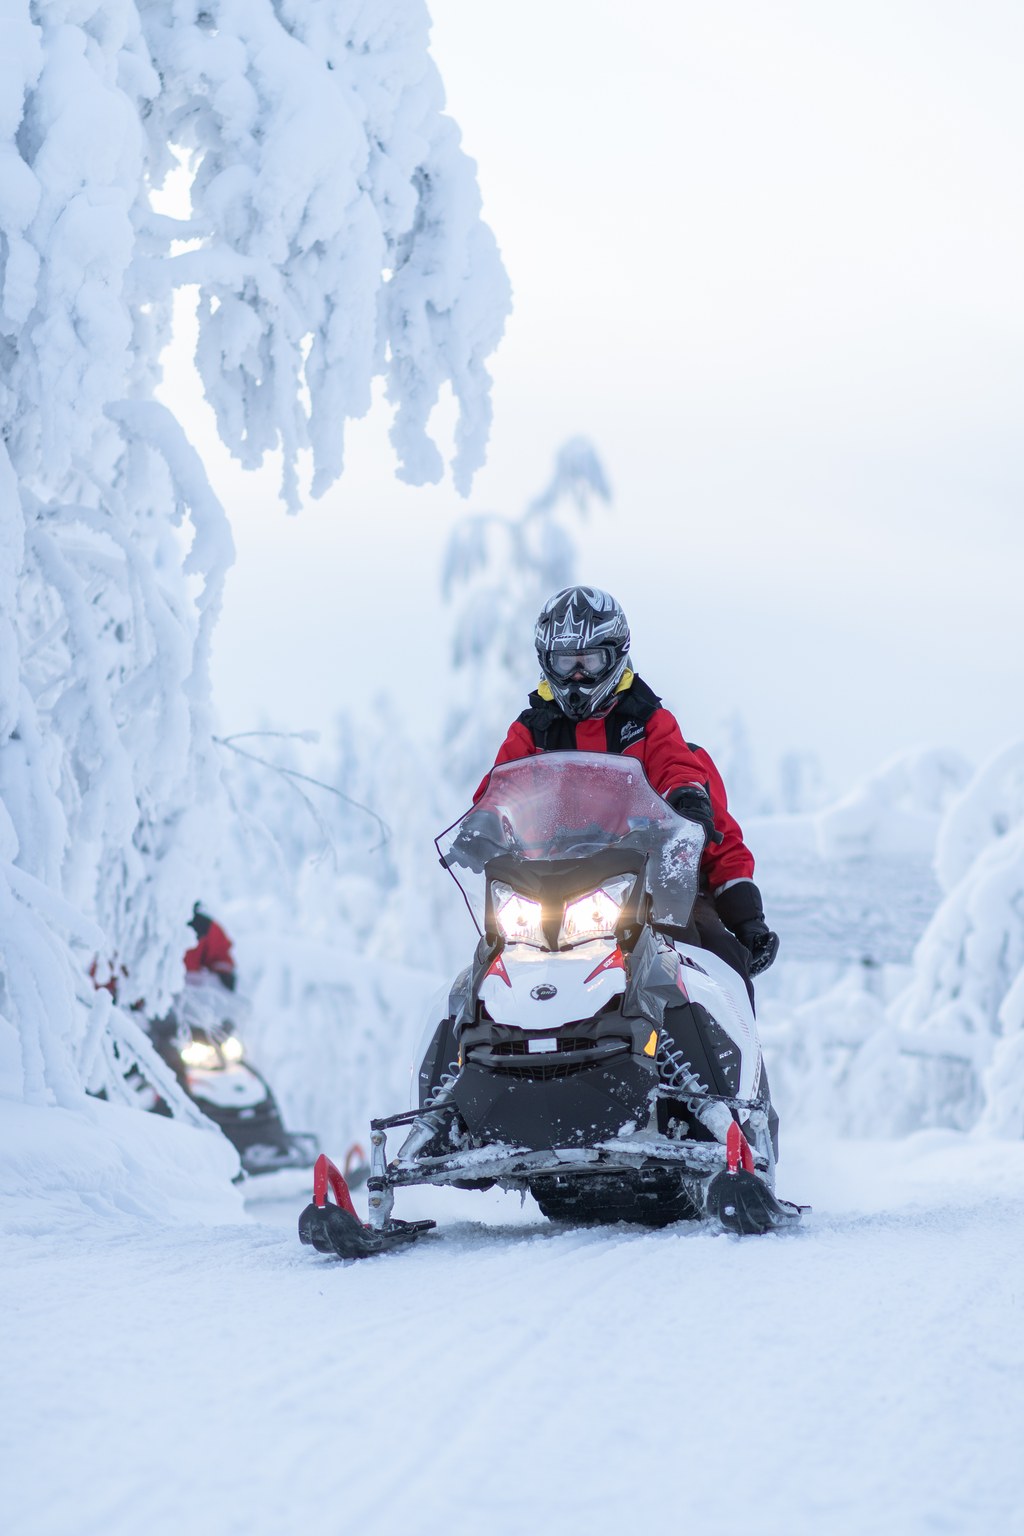 02 Snowmobiling in the arctic forest